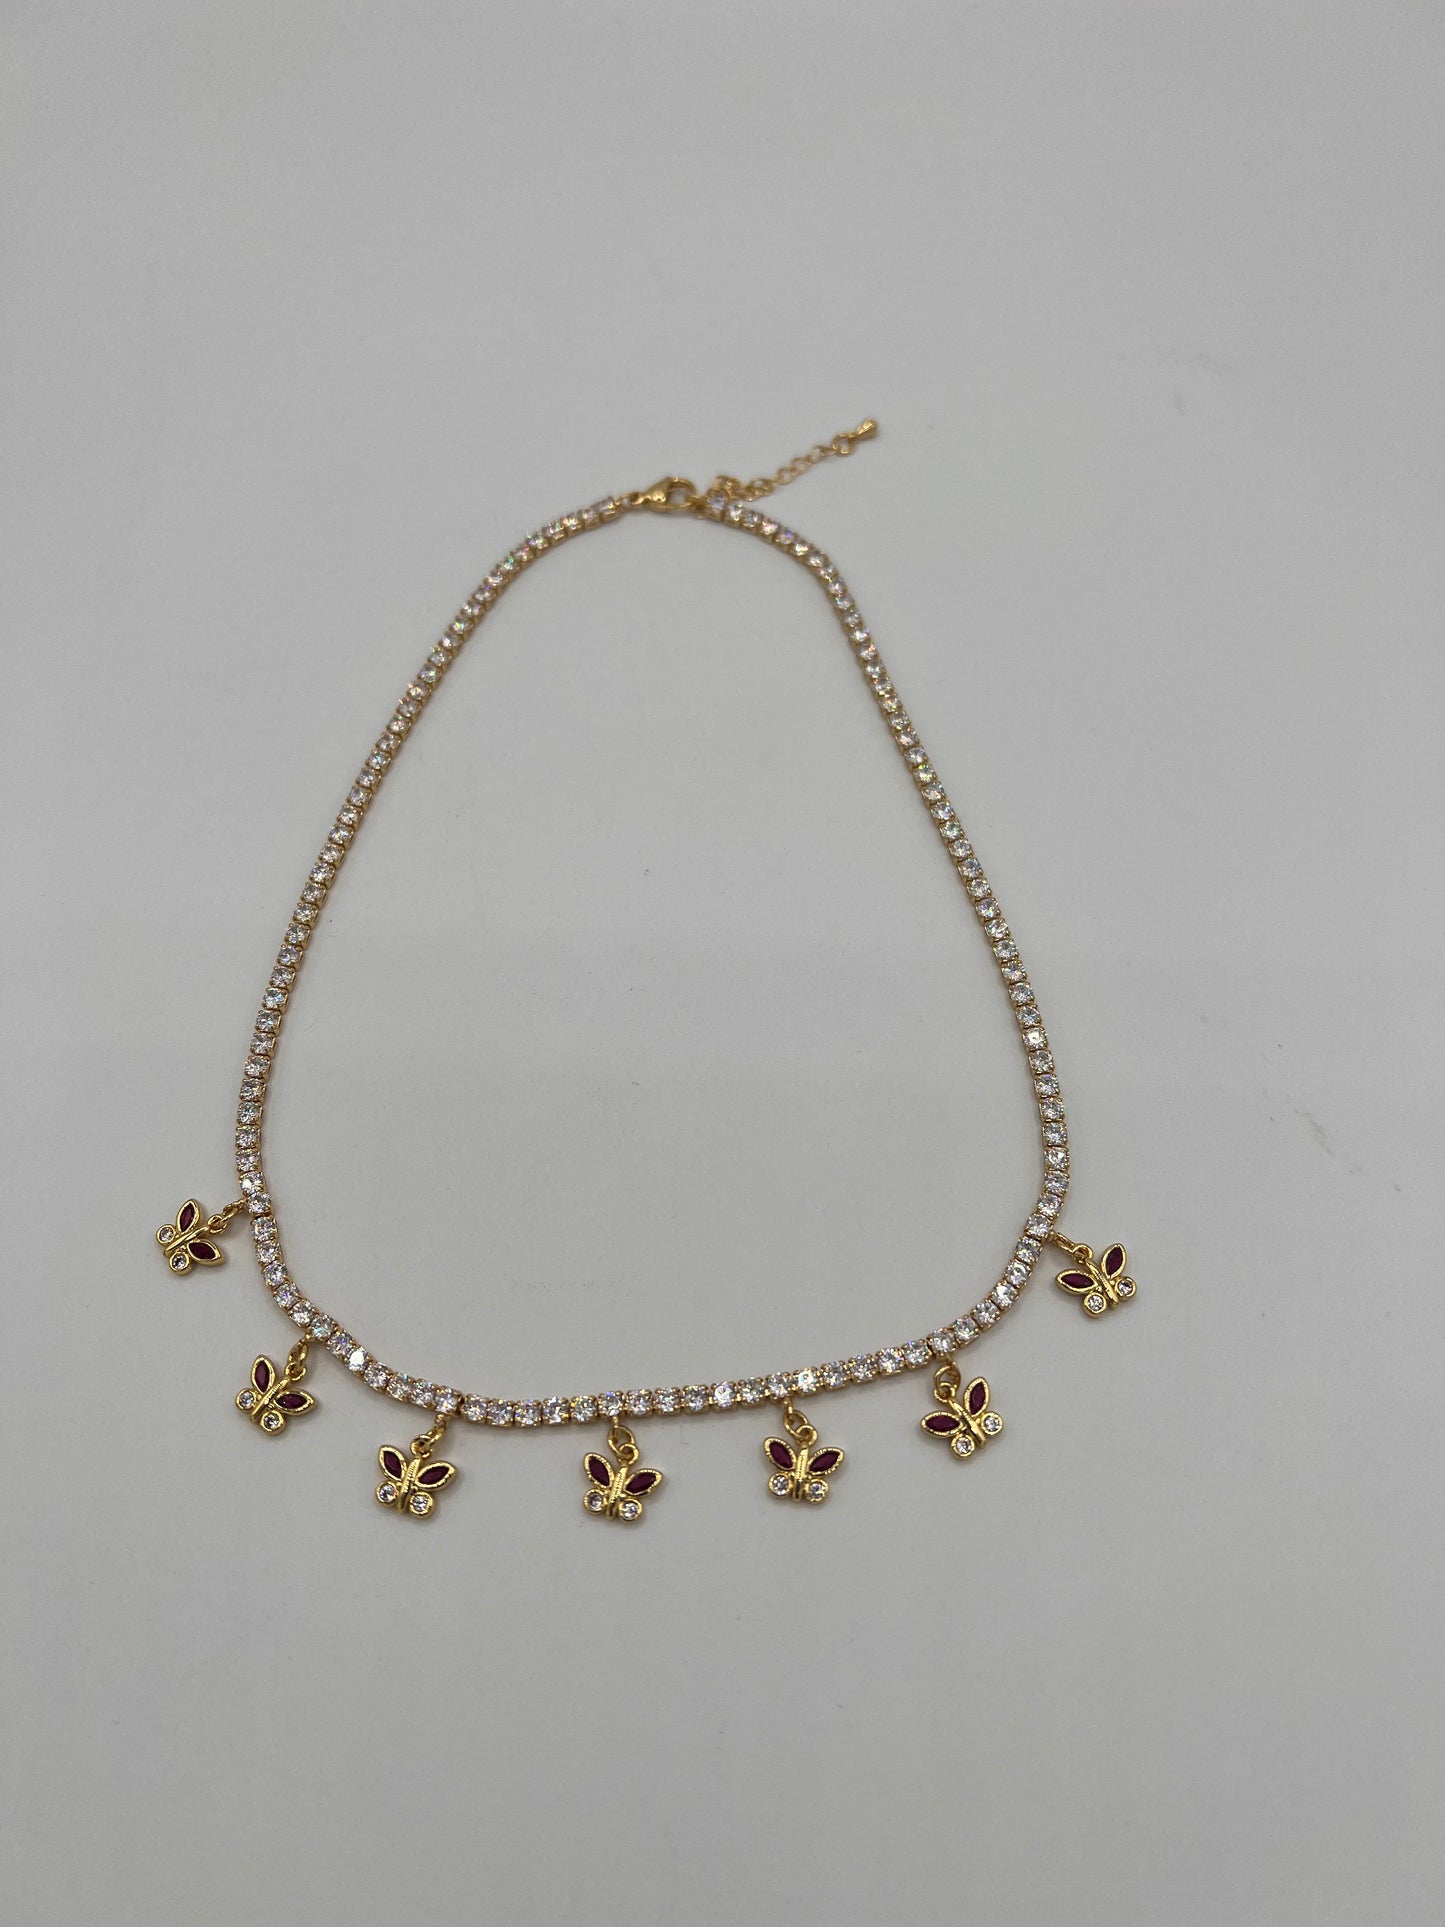 Gold-Plated Butterfly Tennis Necklace for Women – A Delicate Fusion of Elegance and Playfulness